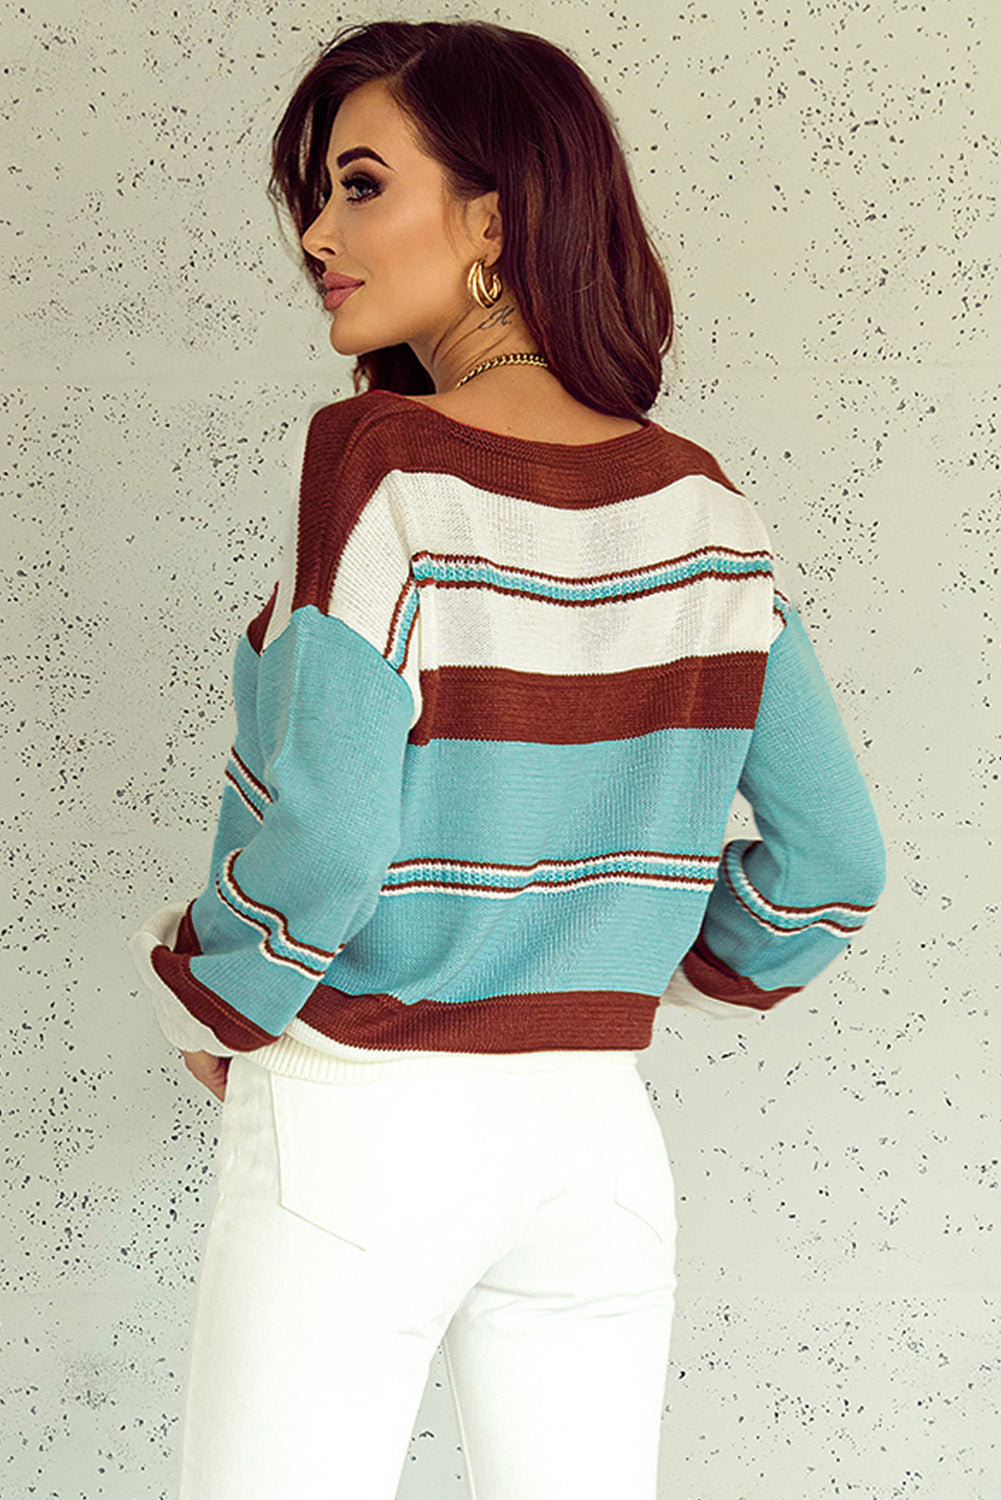 Peach Blossom Striped Pattern Knit V Neck Sweater (3 Colors)